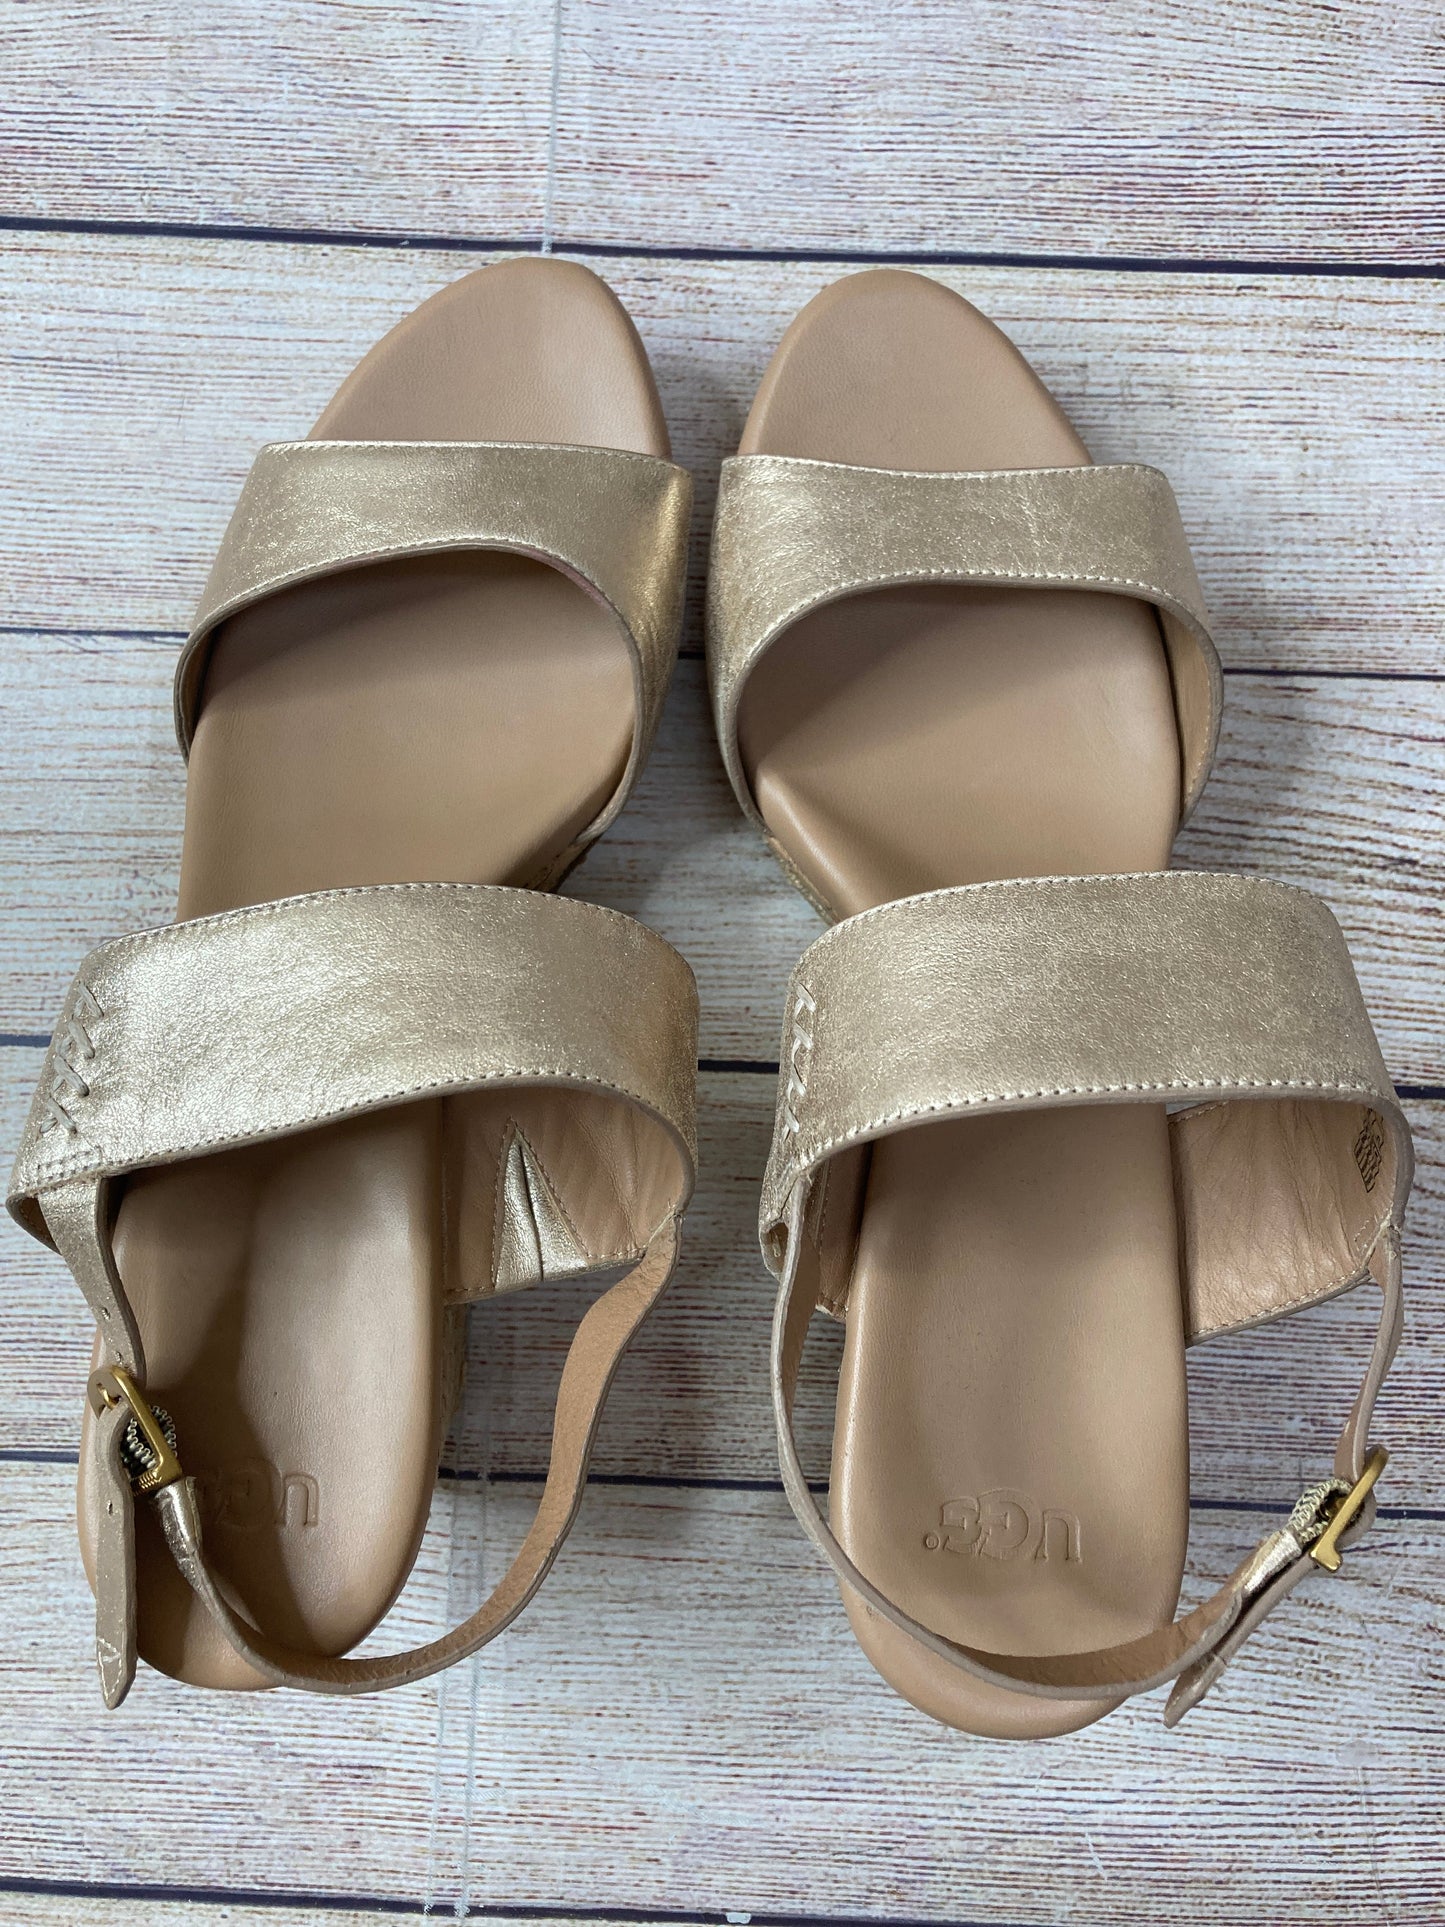 Sandals Heels Wedge By Ugg  Size: 10